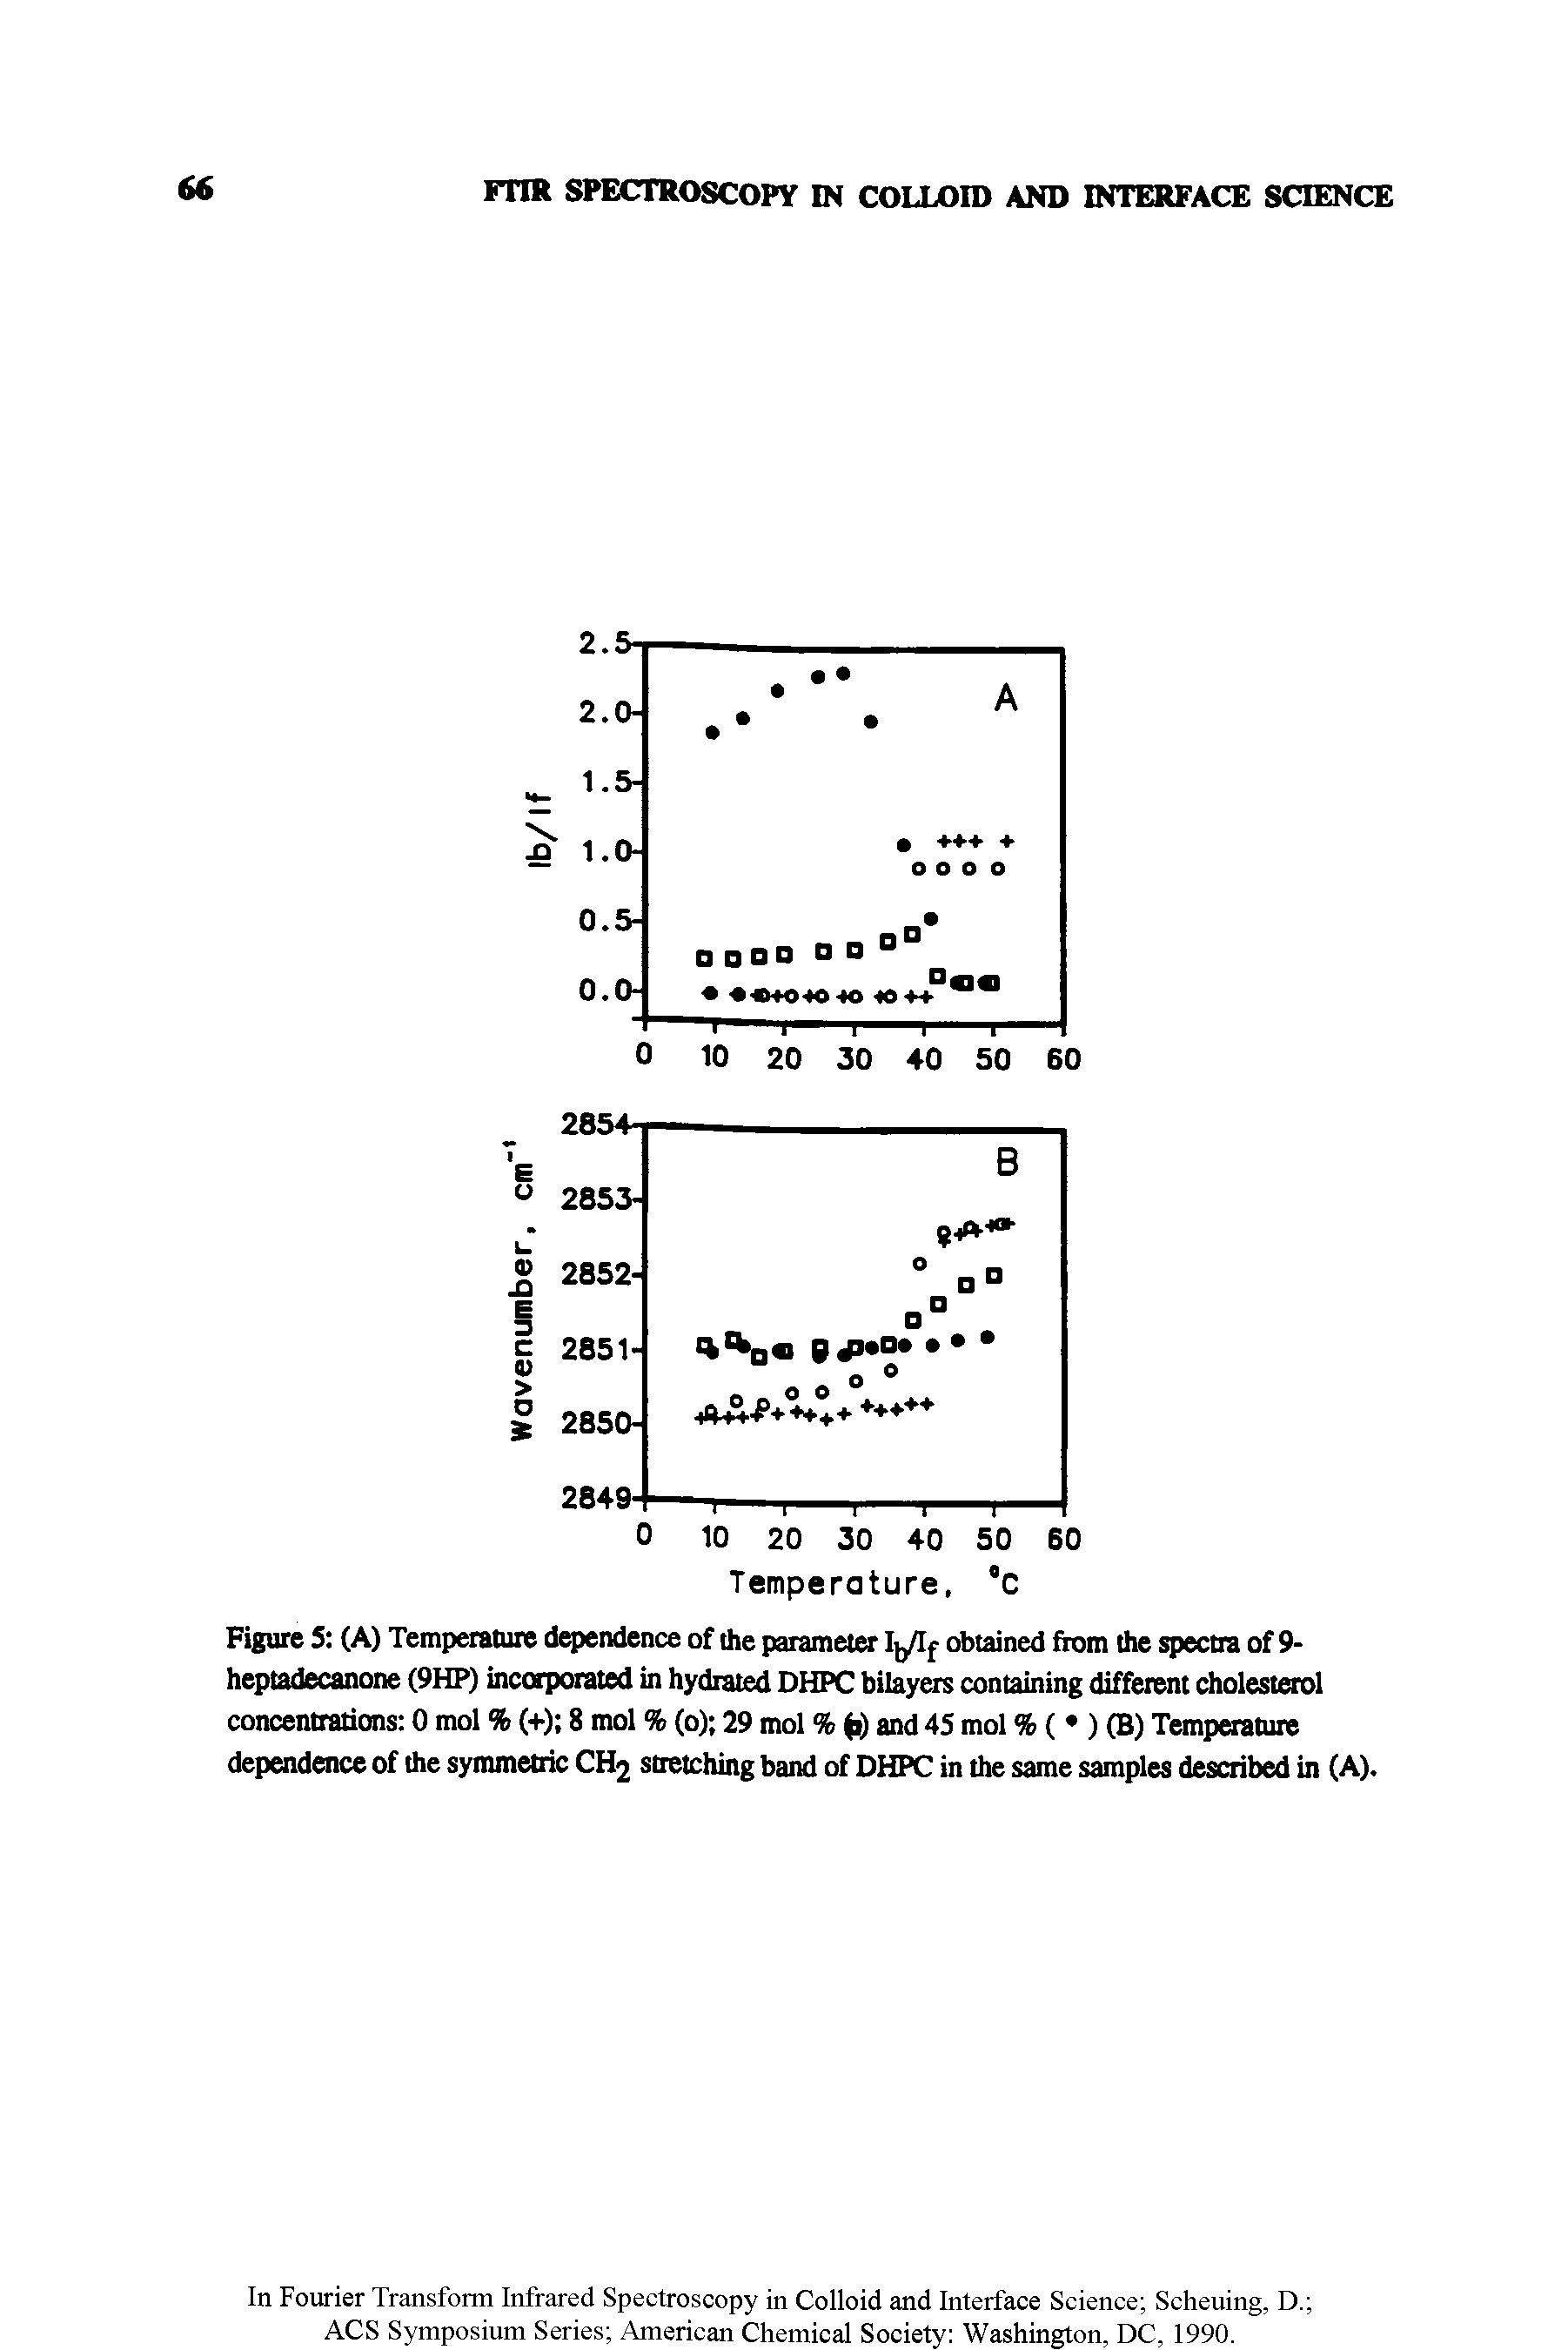 Figure 5 (A) Temperature dependence of the parameter I /If obtained from the spectra of 9-heptadecanone (9HP) incciporated in hydrated DHPC bilayers containing different cholesterol concentrations 0 mol % (+) 8 mol % (o) 29 mol % ) and 45 mol % ( ) (B) Temperature dependence of the symmetric CHj stretching band of DHPC in the same samples described in (A).